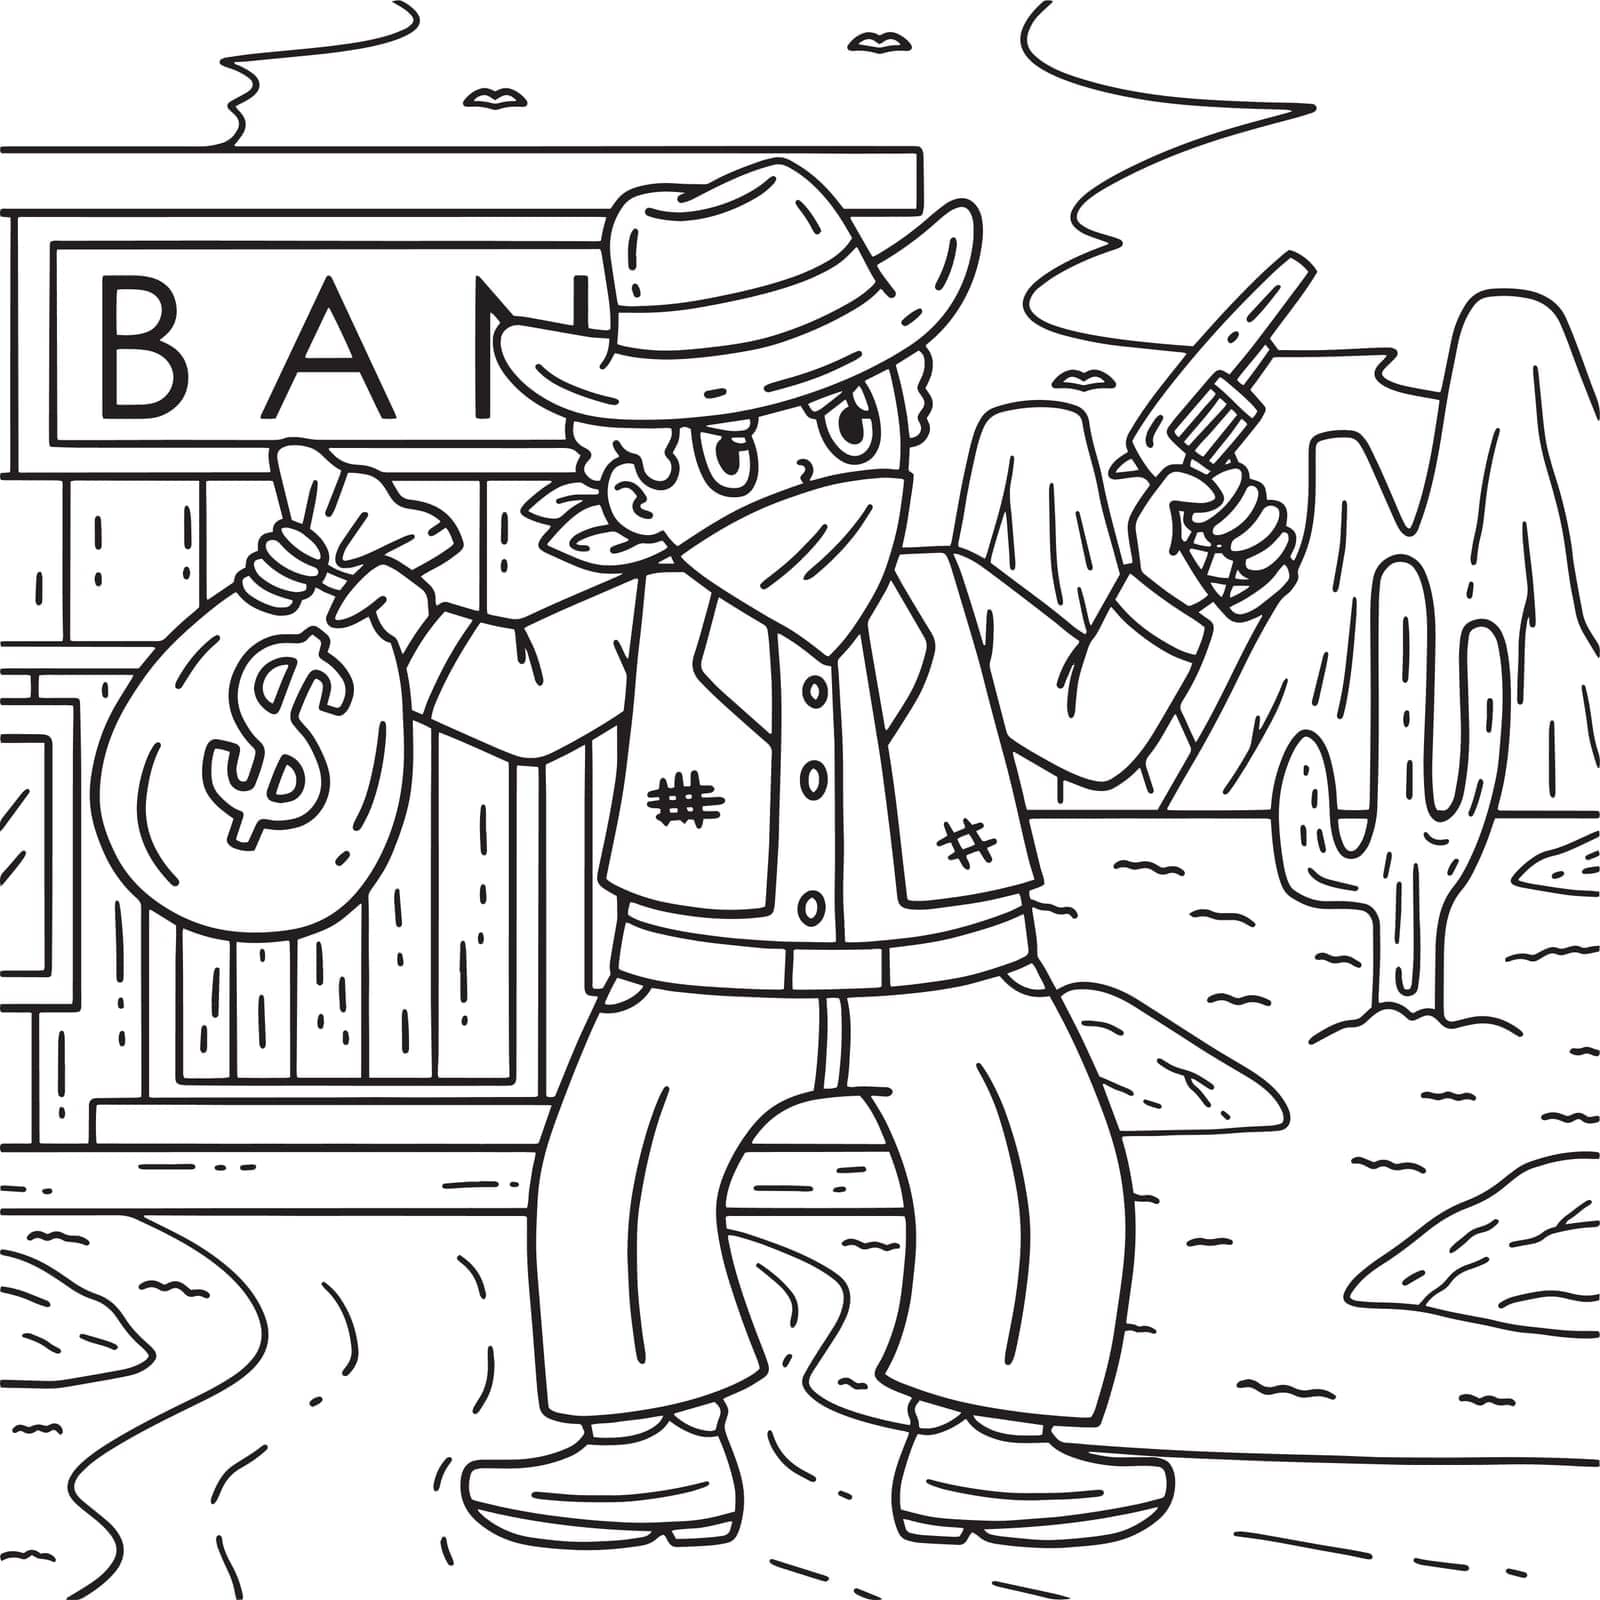 A cute and funny coloring page of a Cowboy Bandit. Provides hours of coloring fun for children. To color, this page is very easy. Suitable for little kids and toddlers.